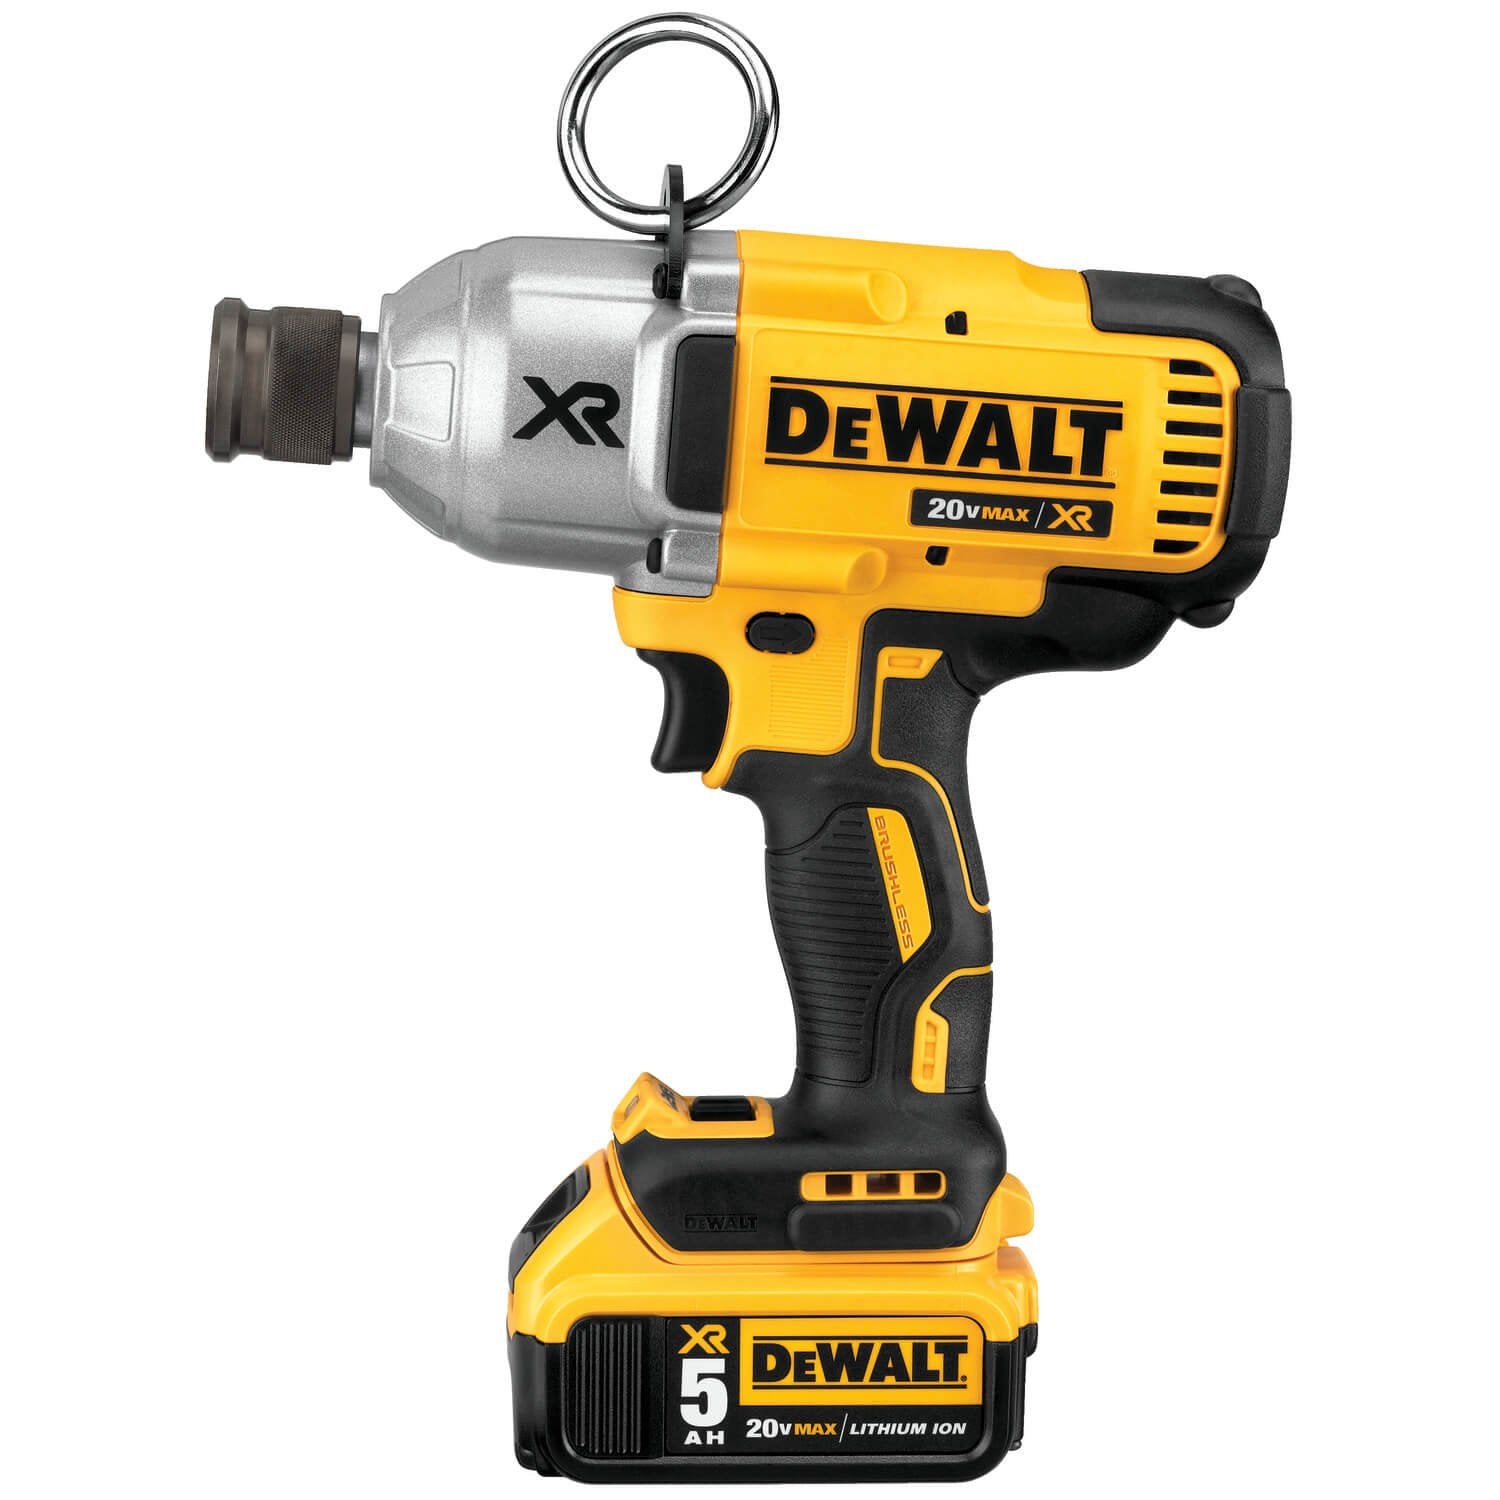 DEWALT DCF898P2 20V MAX XR Brushless High Torque Impact Wrench Kit with QR Chuck